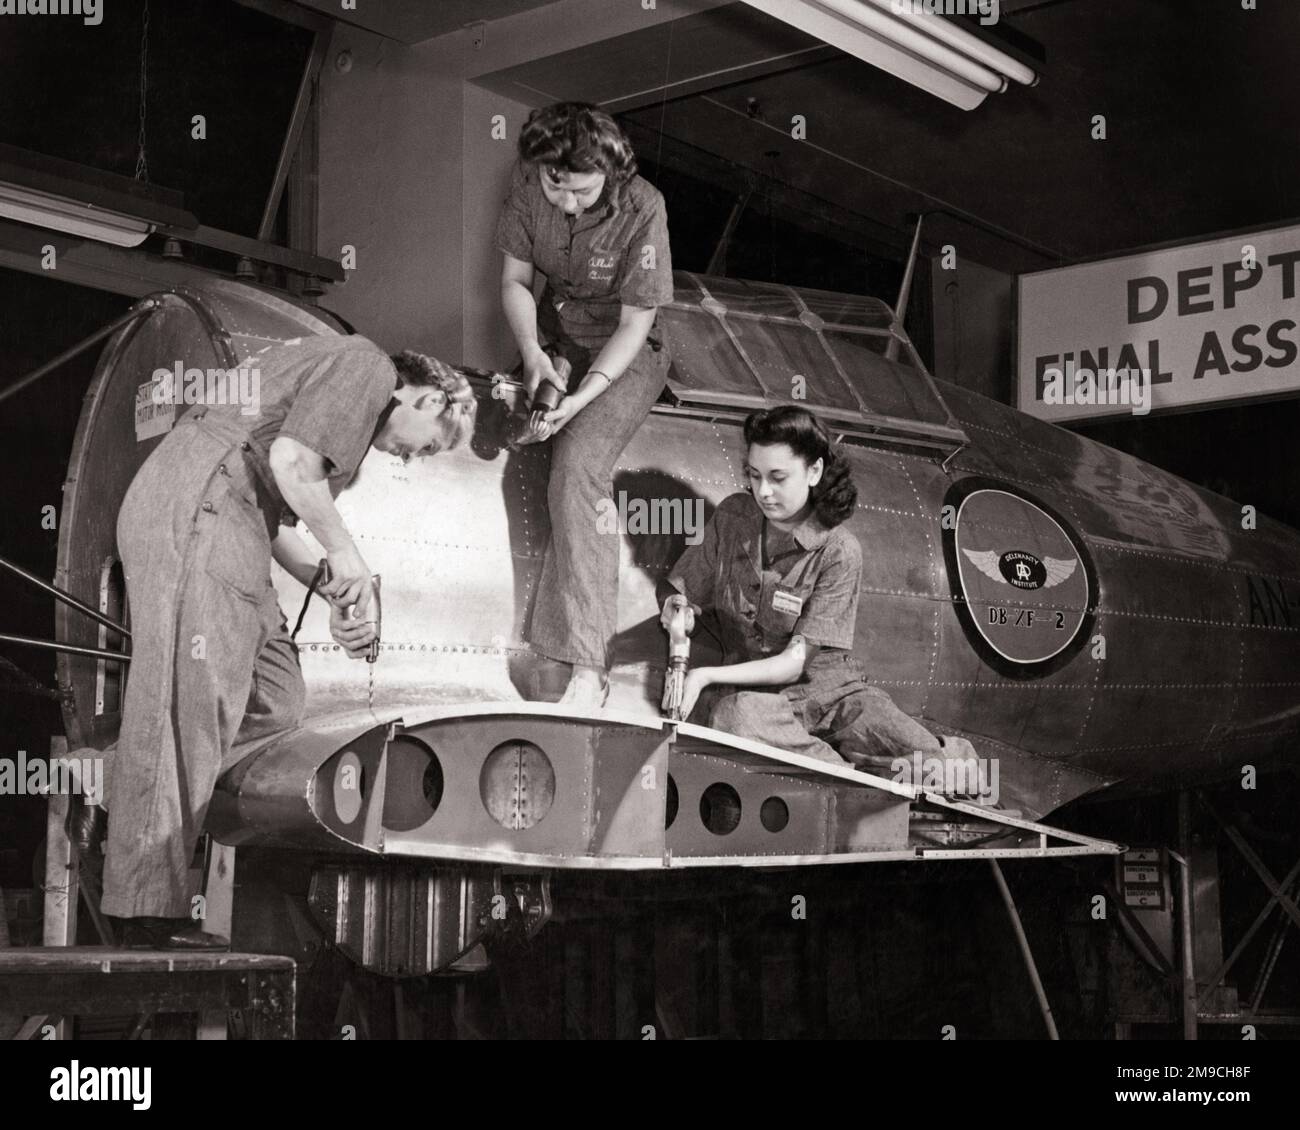 1940s THREE YOUNG WOMEN IN TRAINING FOR WARTIME JOBS WORKING ON AIRPLANES IN DEFENSE FACTORIES DURING WW2 NYC USA - q42295 CPC001 HARS PERSONS INSPIRATION CONFIDENCE B&W GOALS SKILL OCCUPATION SKILLS ADVENTURE AIRPLANES LOW ANGLE PROGRESS WORLD WARS LABOR PRIDE WORLD WAR WORLD WAR TWO WORLD WAR II OPPORTUNITY EMPLOYMENT NYC OCCUPATIONS WARTIME SUPPORT WORLD WAR 2 EMPLOYEE DEFENSE RIVET TOGETHERNESS YOUNG ADULT WOMAN BLACK AND WHITE CIVILIAN FACTORIES LABORING OLD FASHIONED Stock Photo